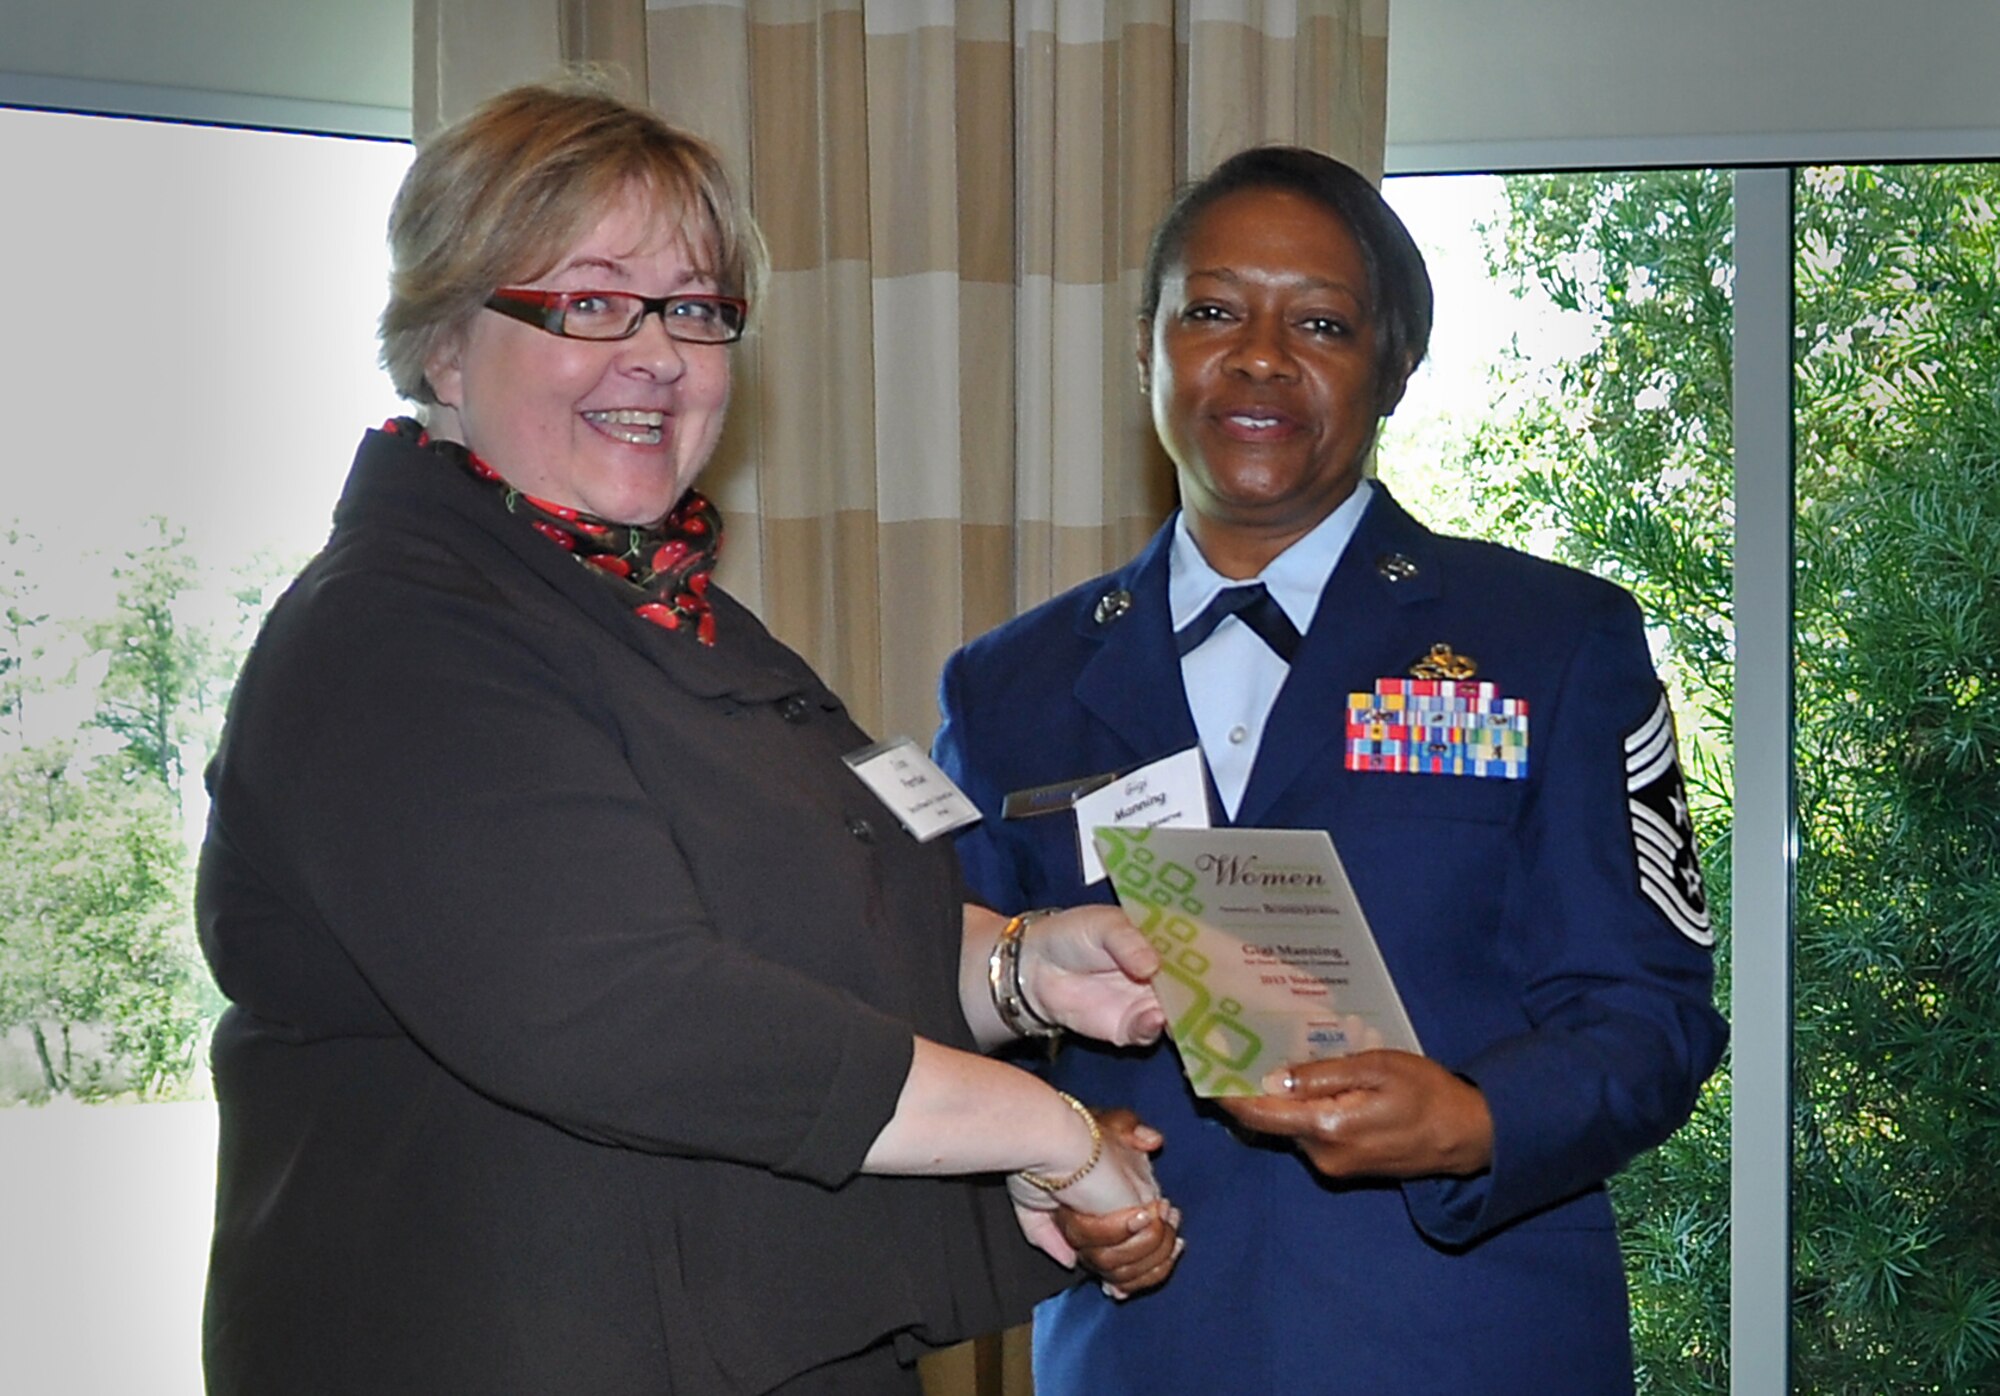 Chief Master Sgt. Gigi Manning is congratulated by Jane Perdue after being named one of Charleston’s Influential Women in Business at an awards luncheon July 11 on Daniel Island. The Charleston Regional Business Journal selected Manning as a winner in the Volunteer category due to her extensive involvement with local non-profit and charity organizations. Manning is the 315 AW command chief master sergeant, and Perdue is the Center for Women board of directors president. (U.S. Air Force Photo/Capt. Kimberly Champagne)
